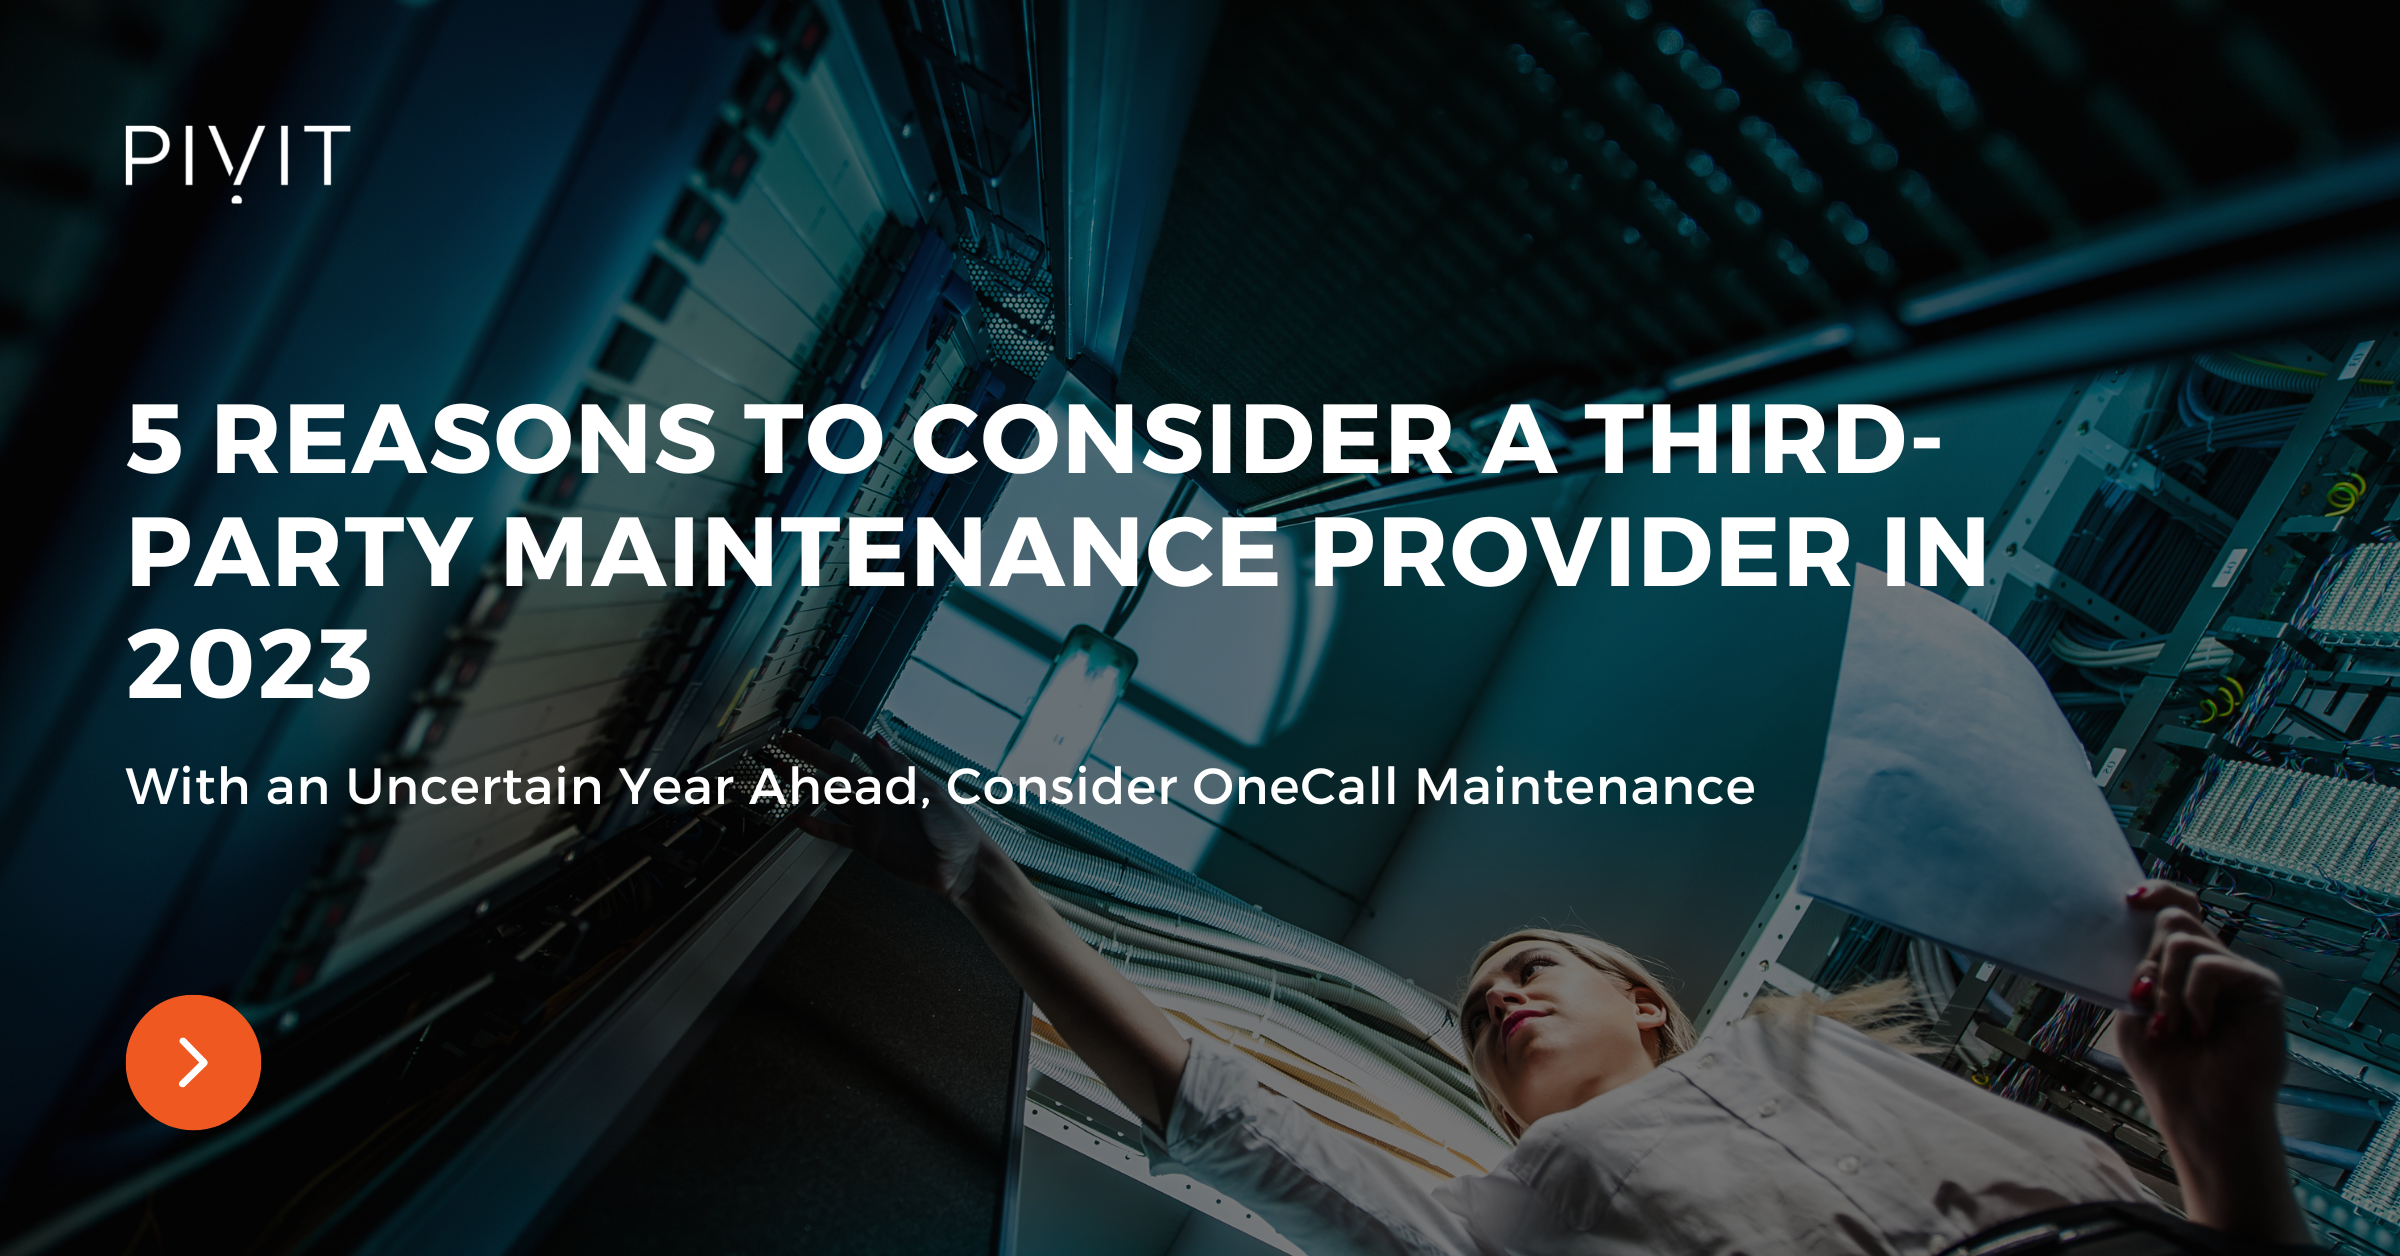 5 Reasons to Consider a Third-Party Maintenance Provider in 2023 - With an Uncertain Year Ahead, Consider OneCall Maintenance